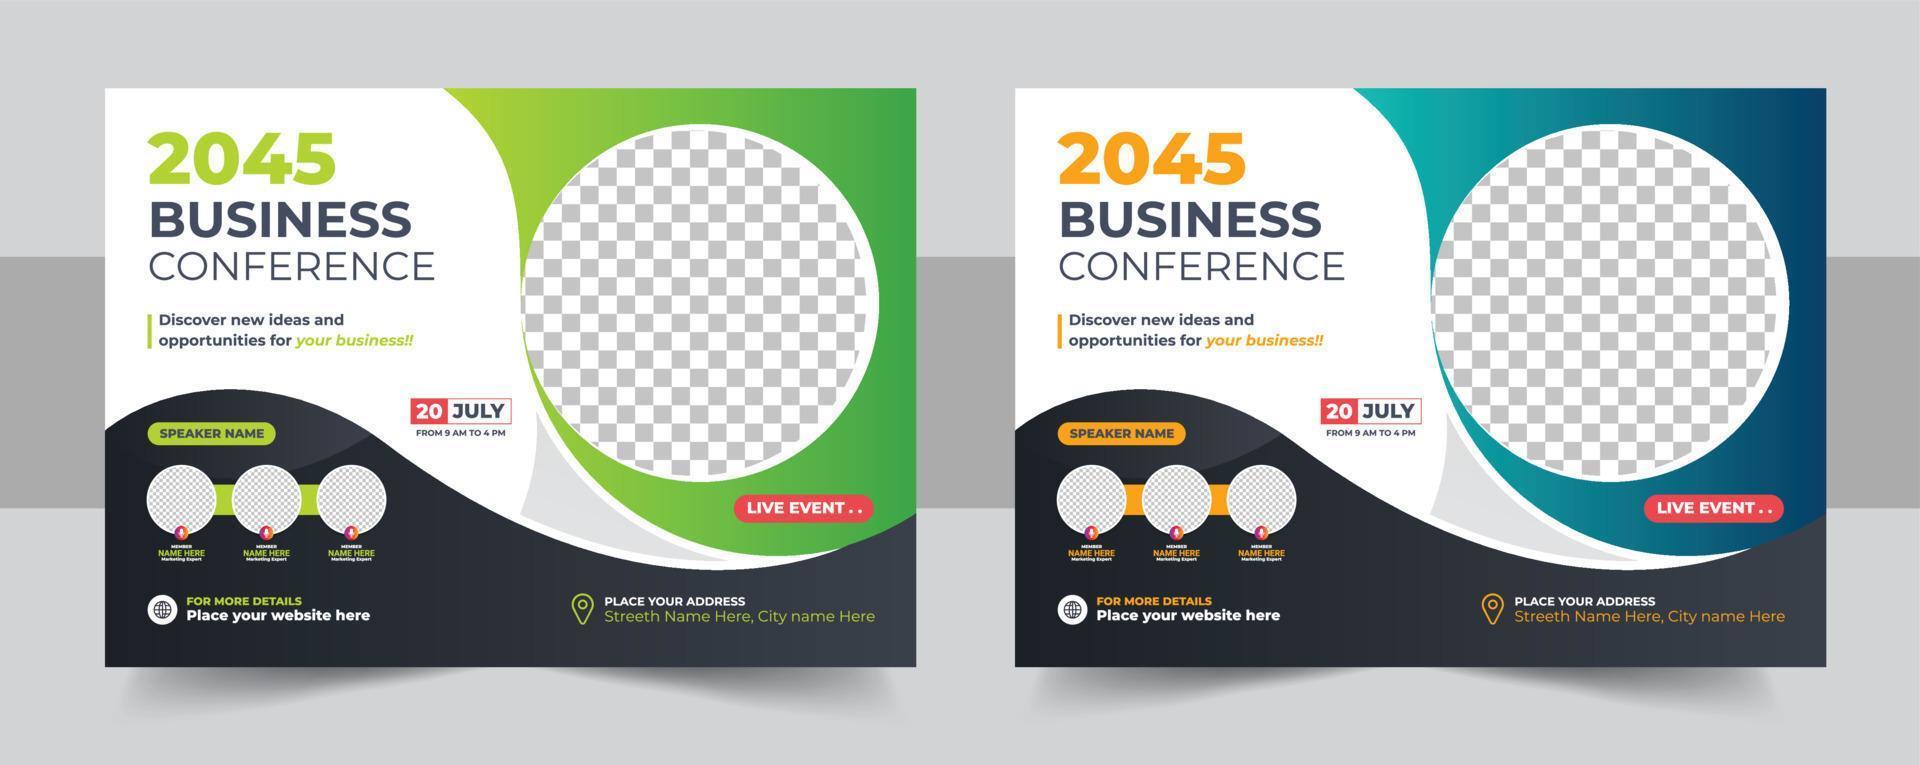 Corporate horizontal business conference flyer template vector